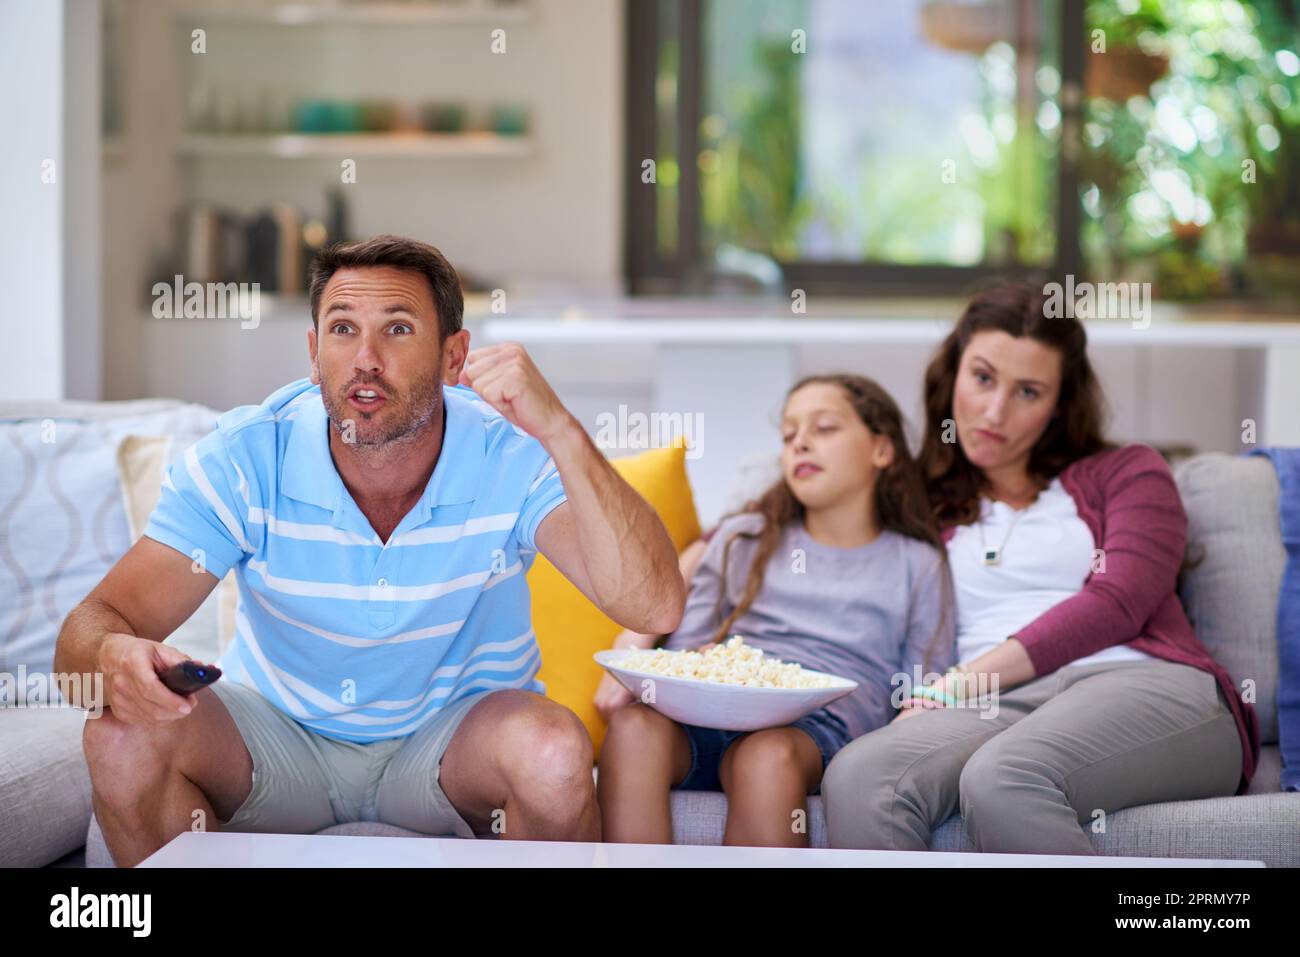 Cheering his team on. a man watching sports on the TV while is family sits bored in the background. Stock Photo